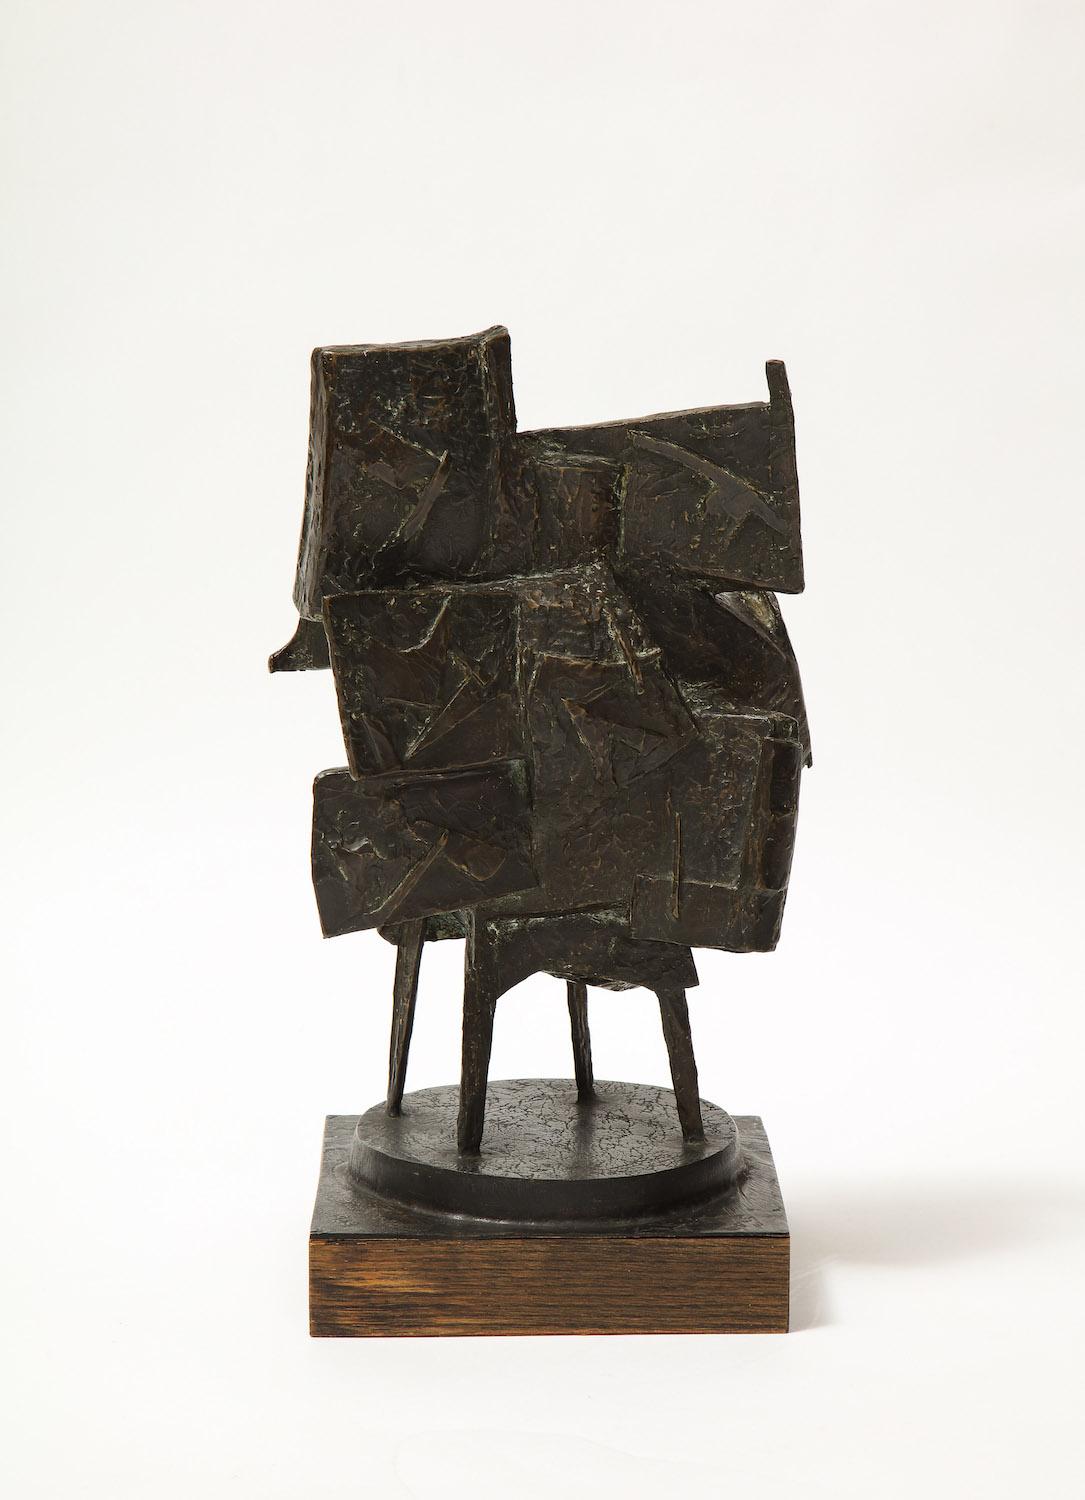 Hand-Crafted Brutalist Sculpture by Morris Brose